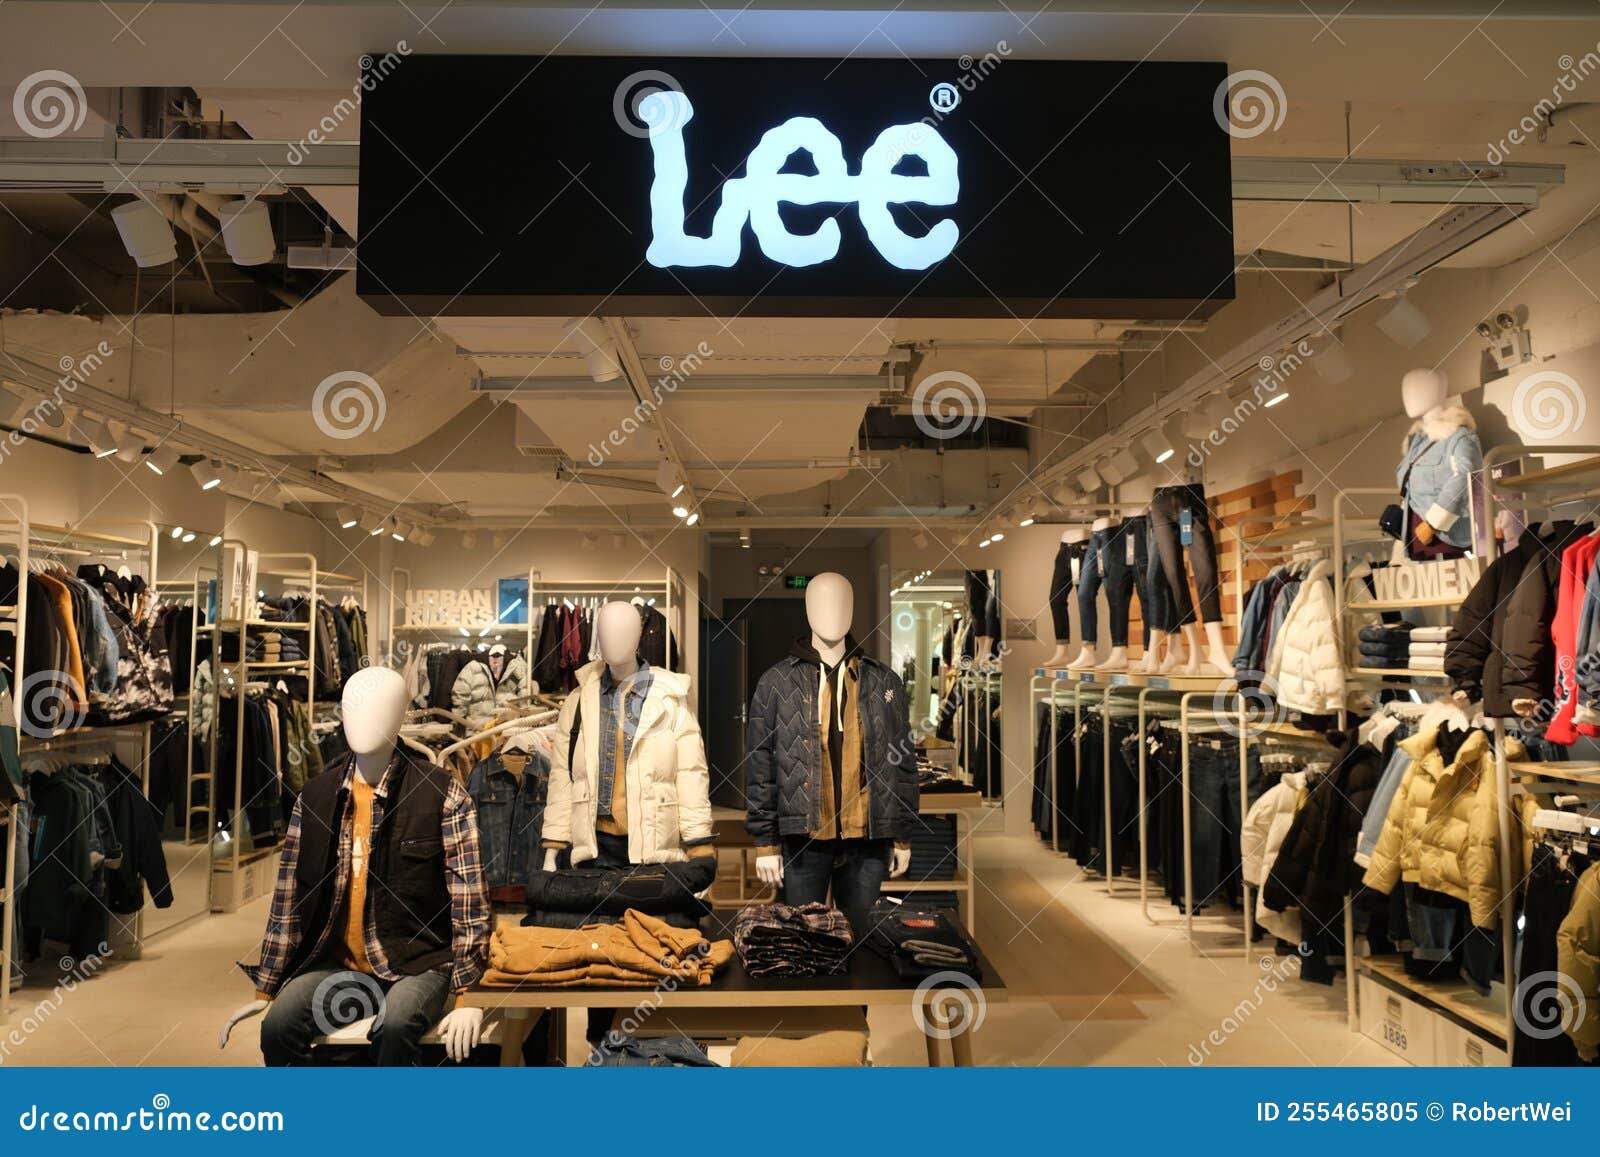 Lee Clothing Store and Brand Sign Editorial Image - Image of clothes ...